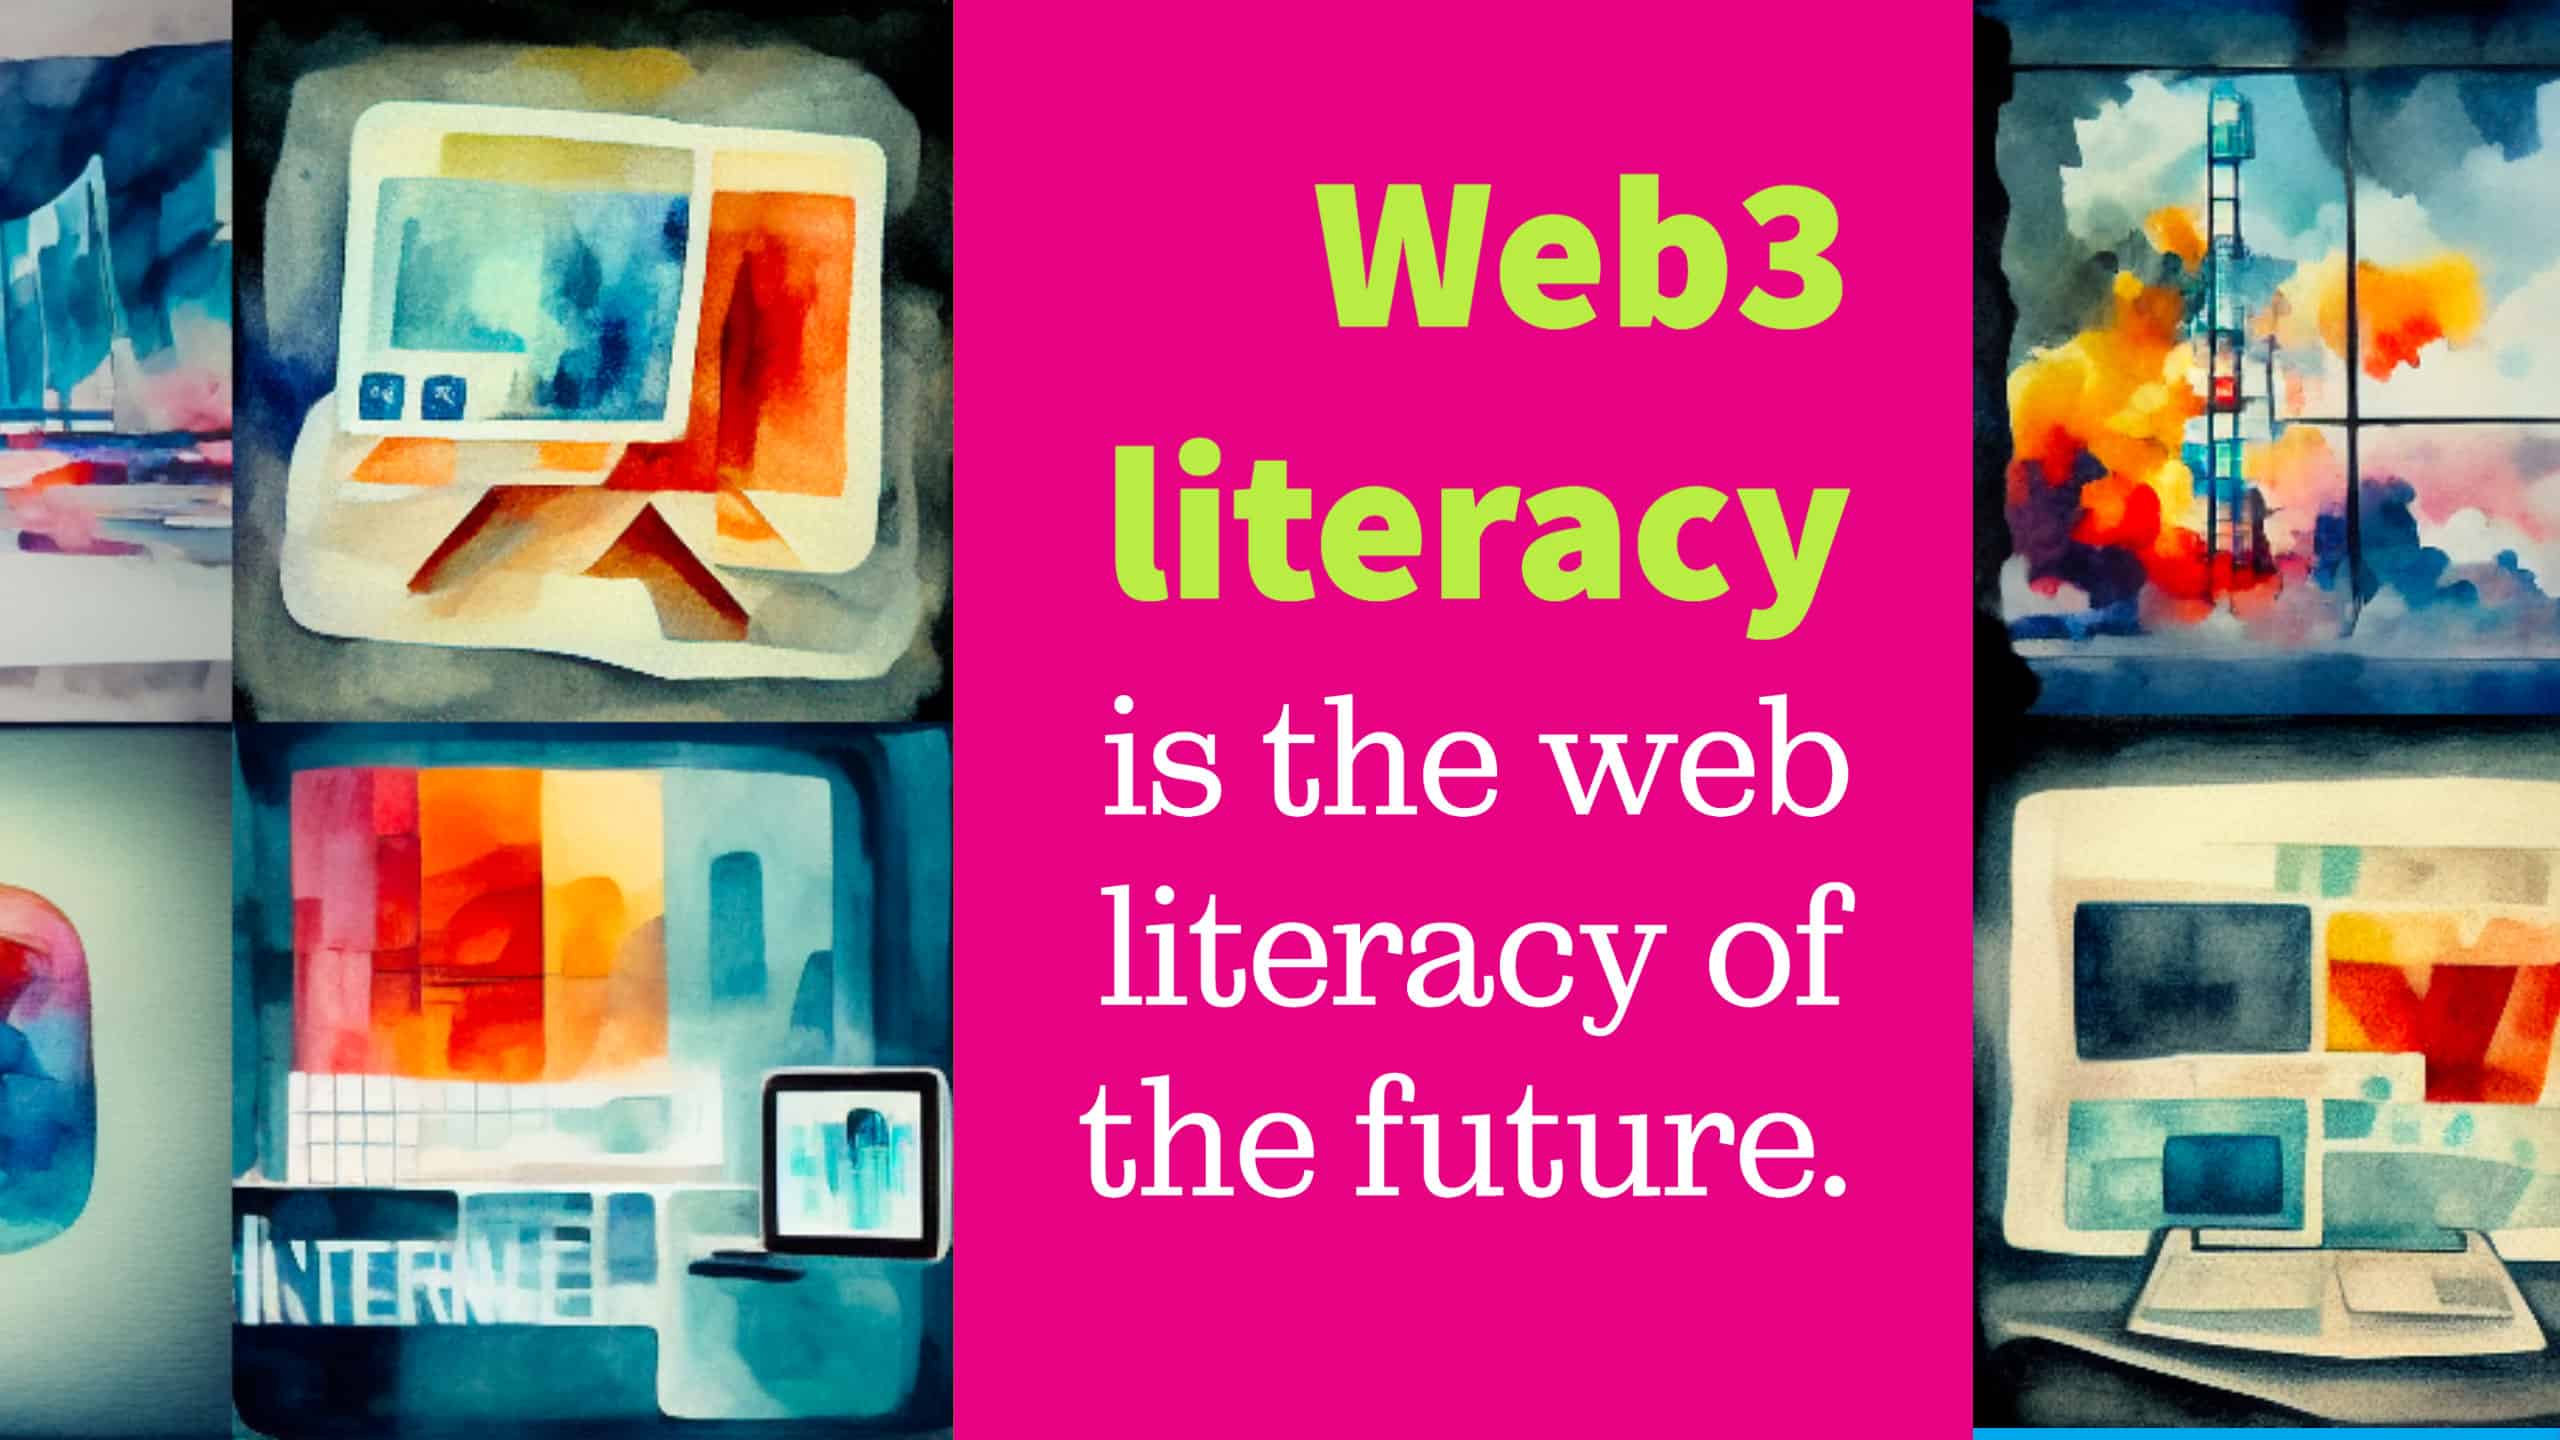 Web3 literacy is the web literacy of the future.